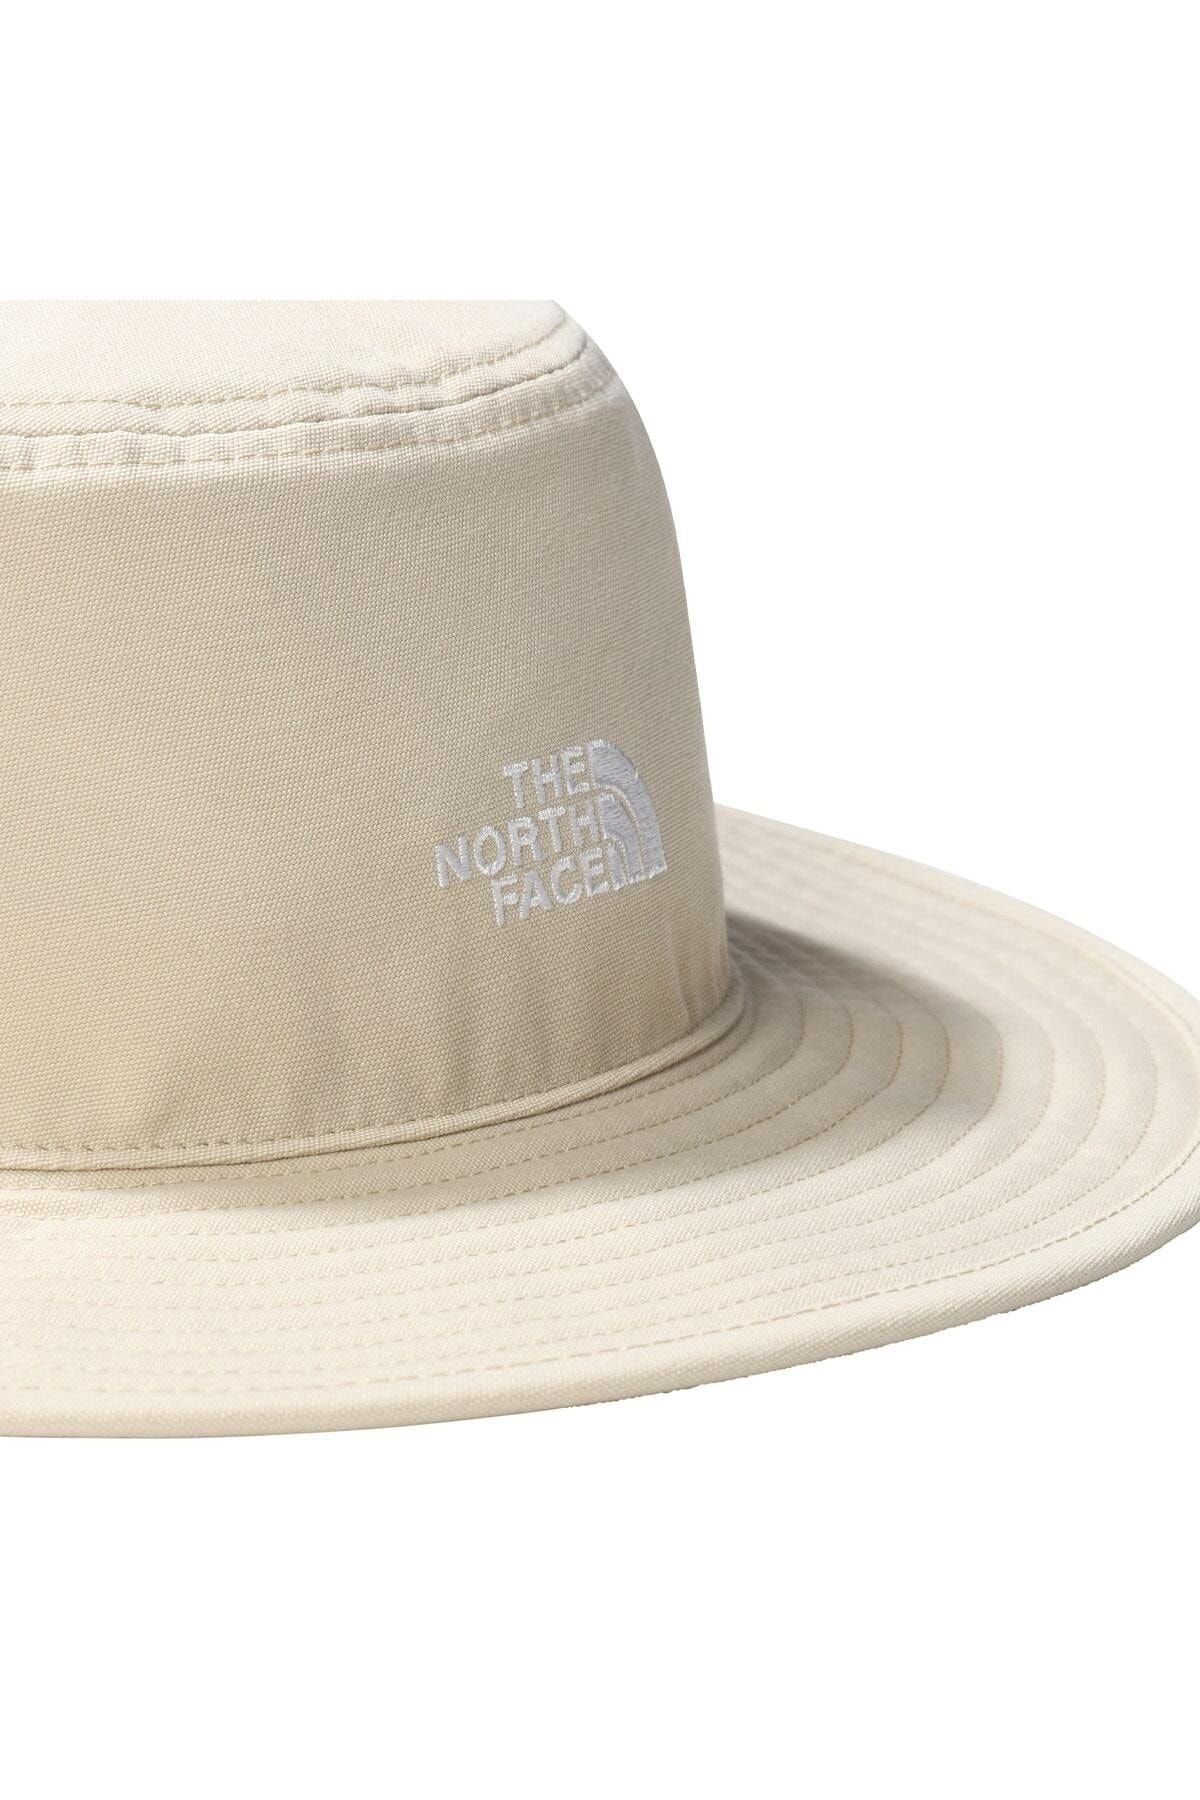 The North Face بازیافت 66 Brımmer Unisex Hat NF0A5FX3